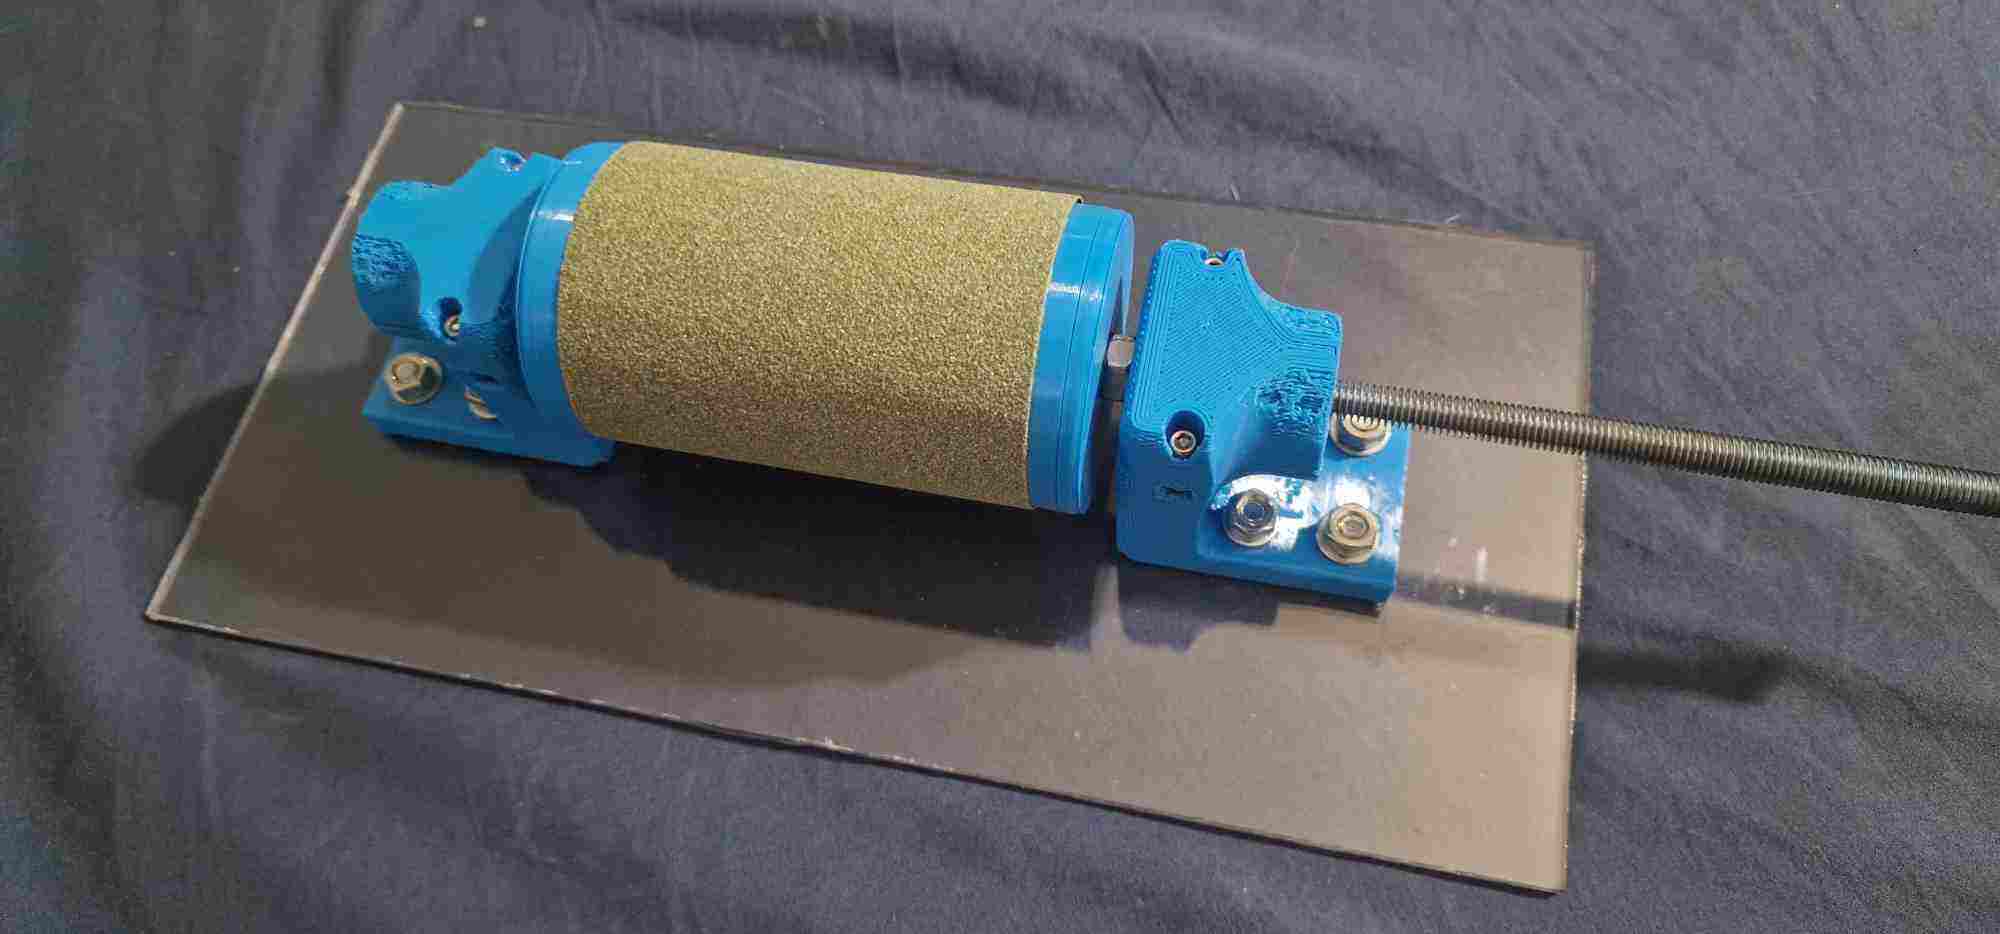 Knife Sanding Tool to be used with drill